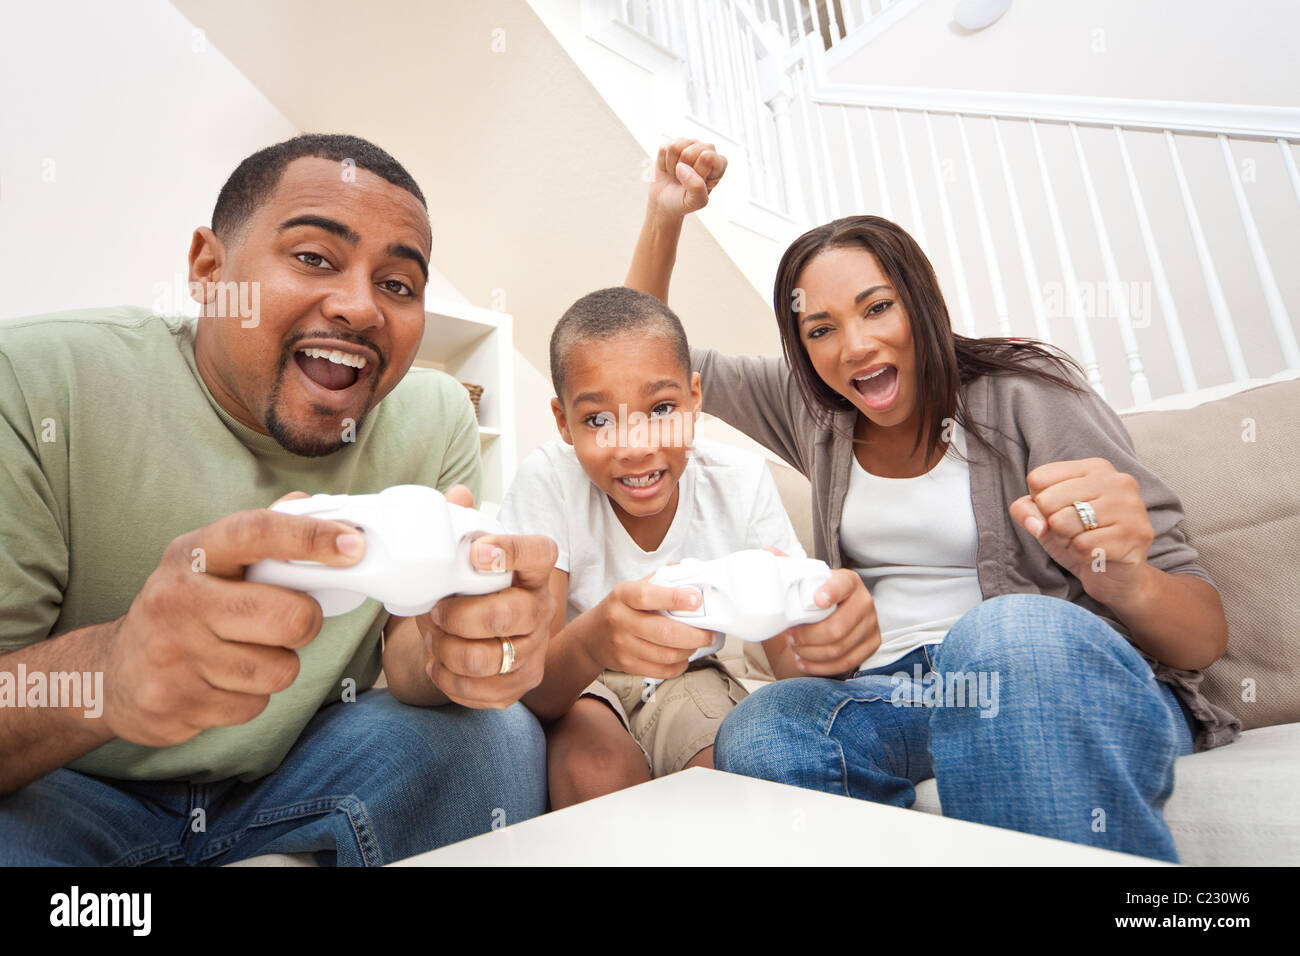 African American family, parents and son, having fun playing video console games together Stock Photo